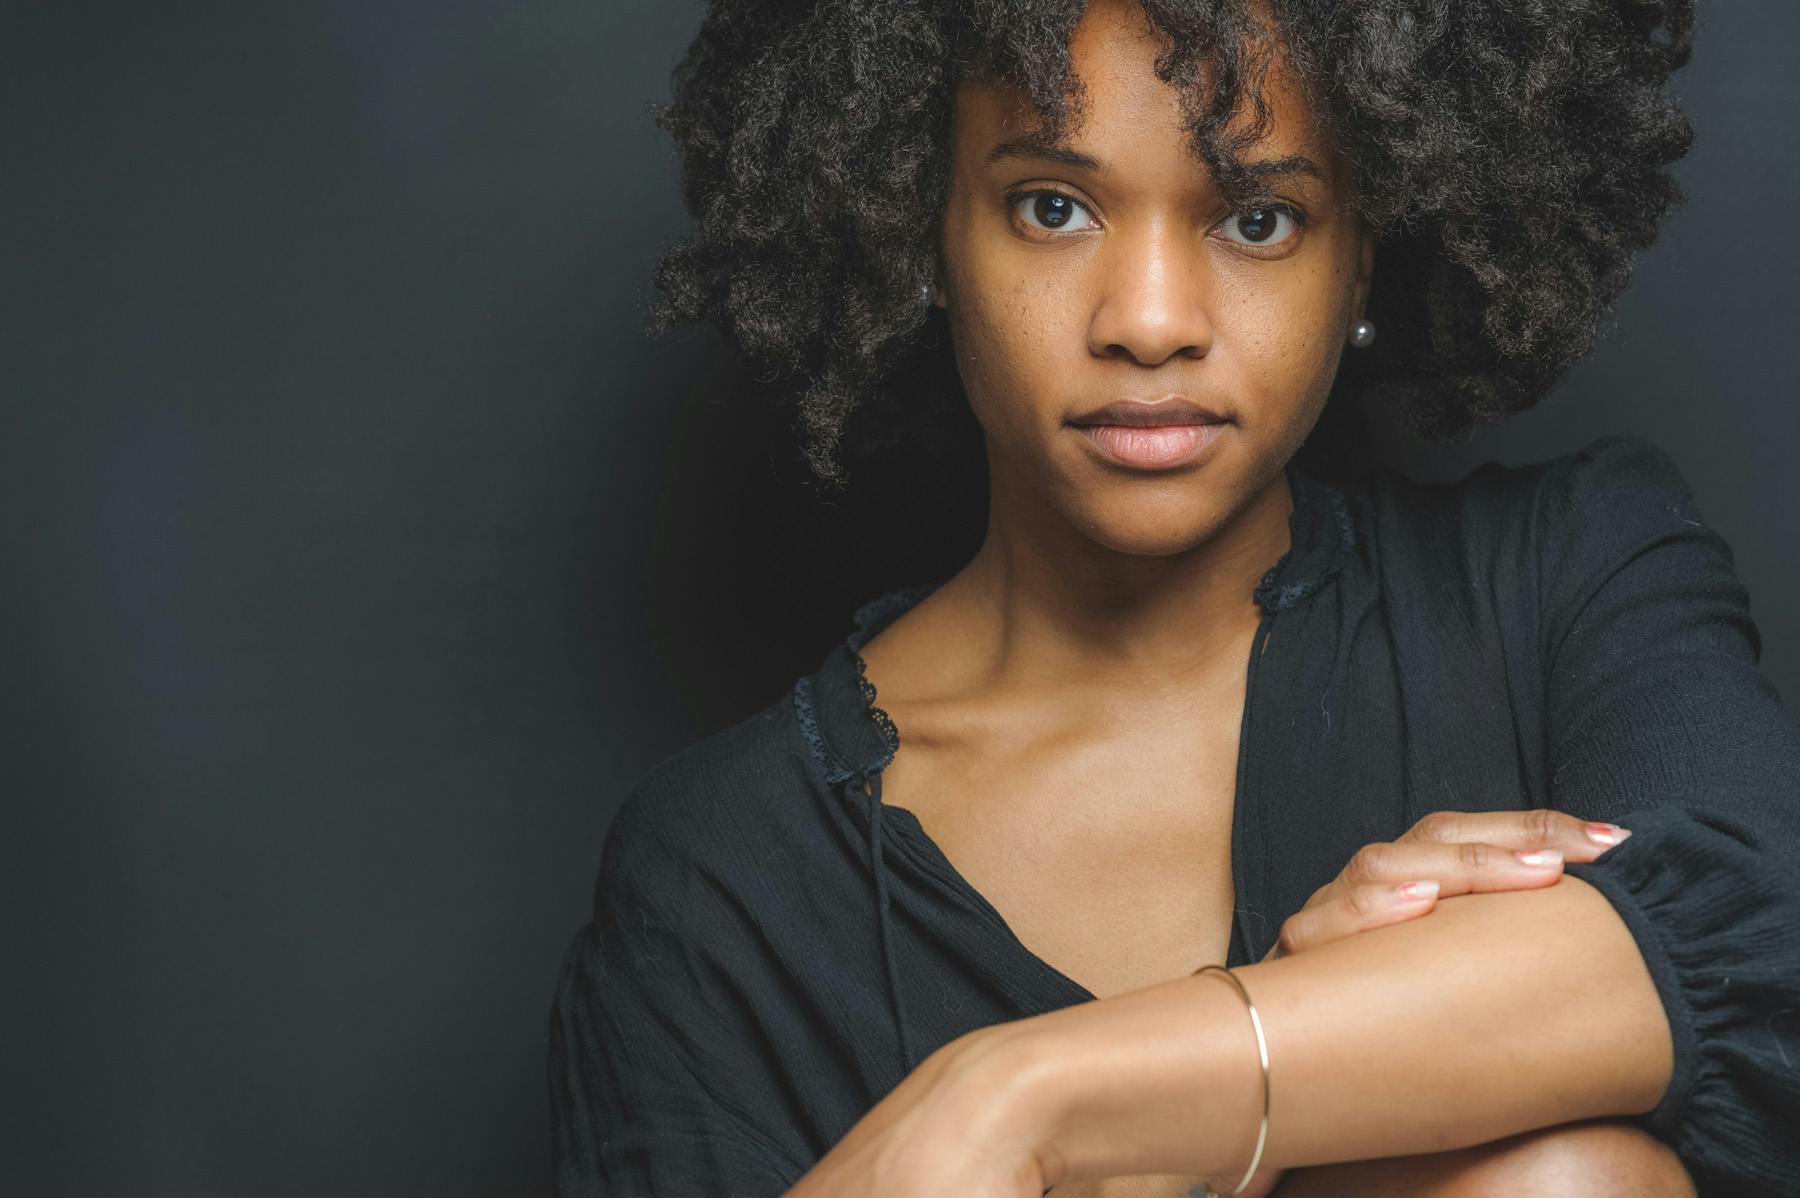 portrait of photographer and dancer Michelle Reid sitting in front of a black background wearing a black top with a gold bracelet on her wrist.